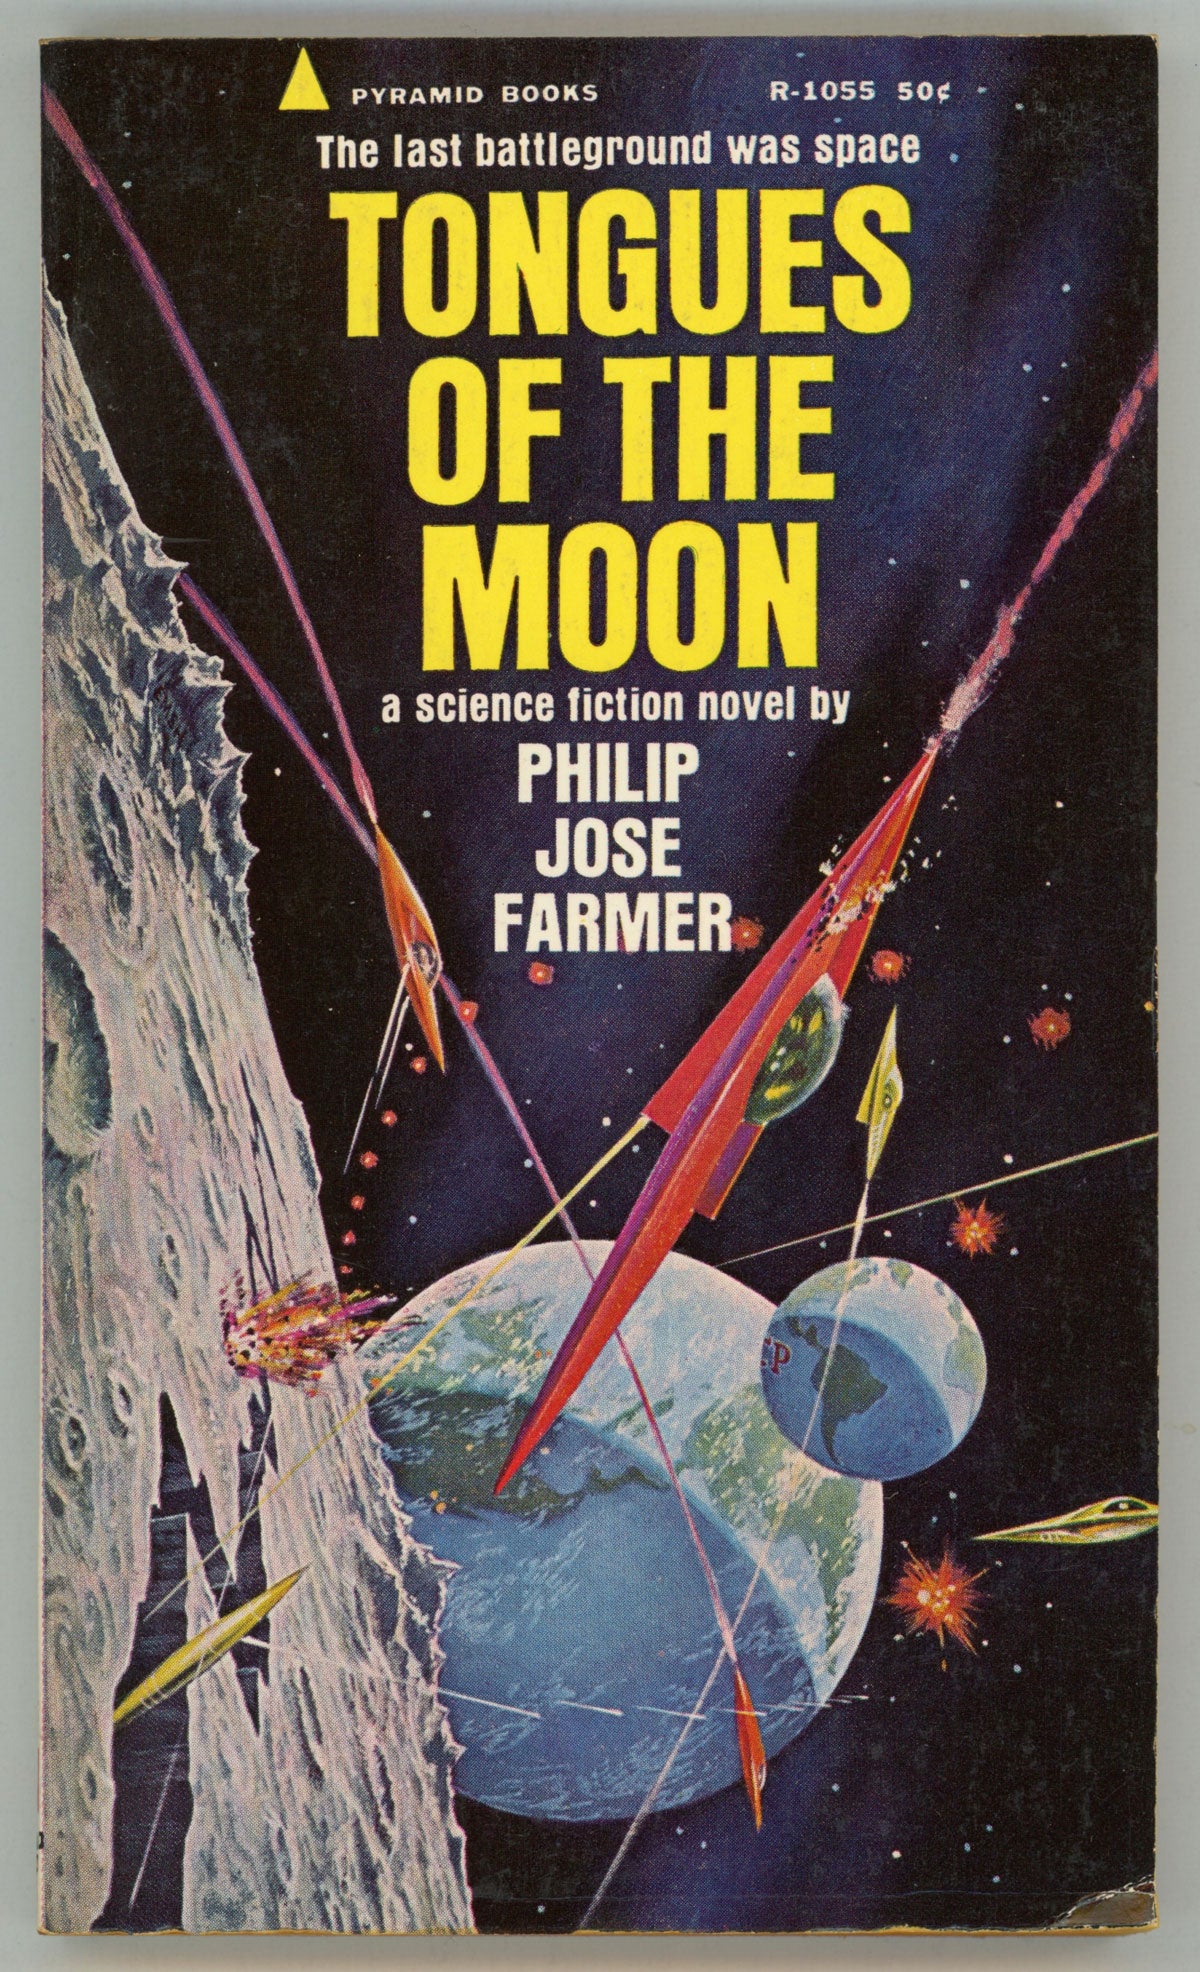 TONGUES OF THE MOON by Philip Jose Farmer on L. W. Currey, Inc